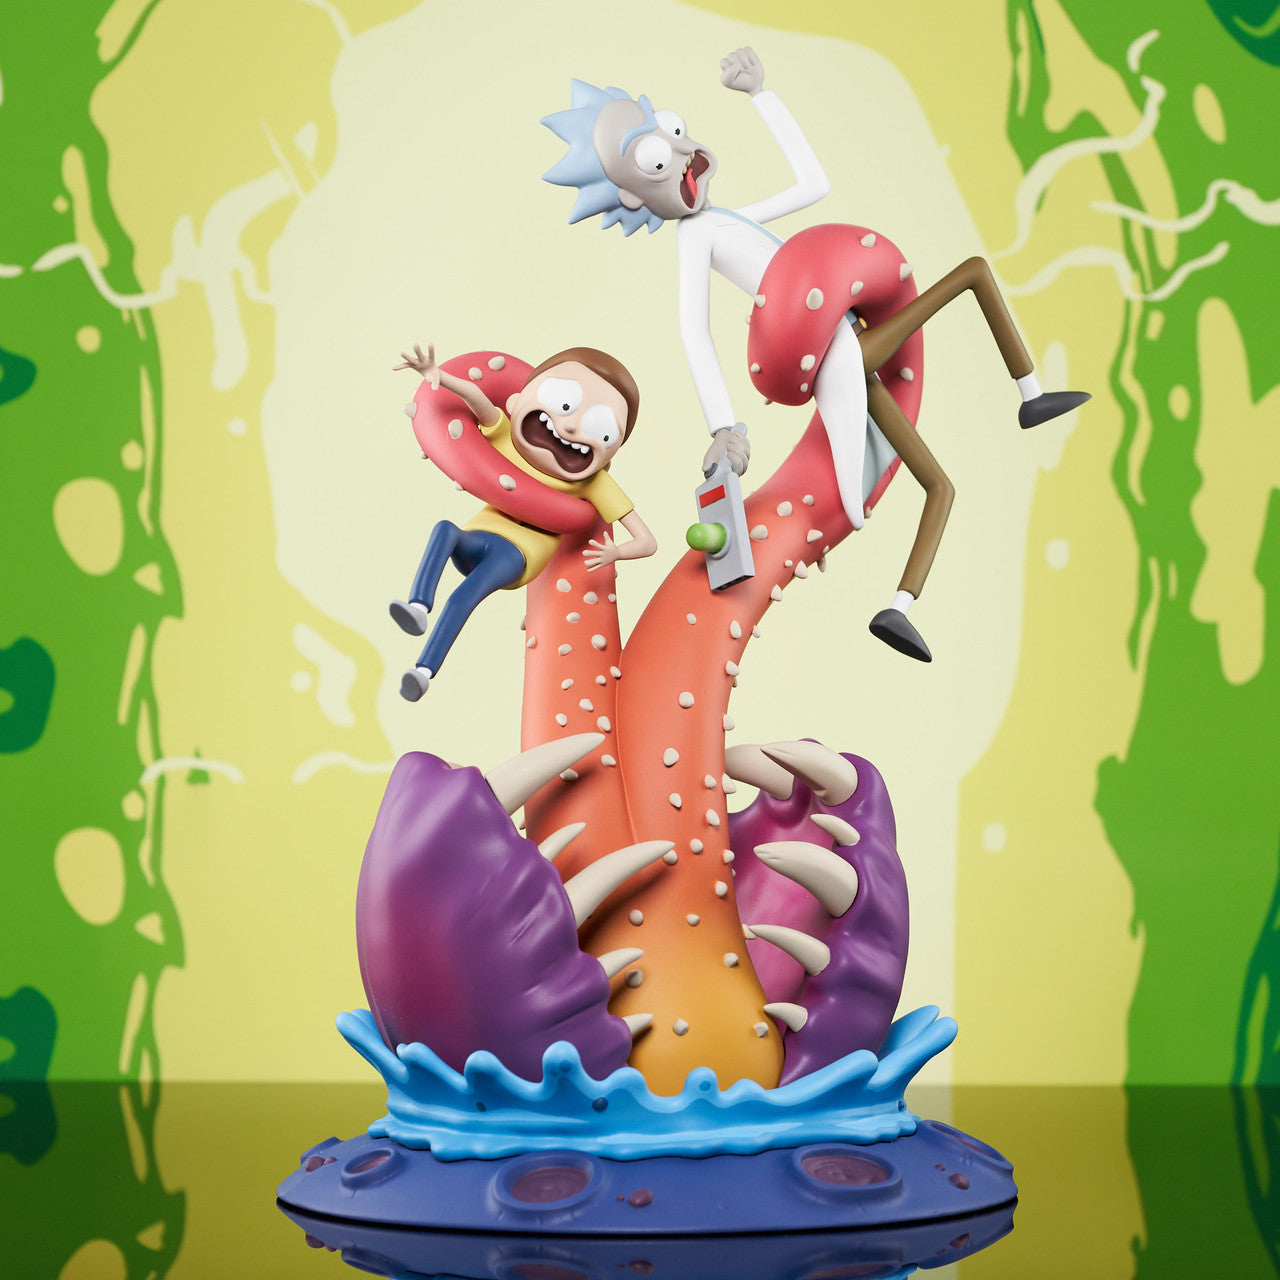 Rick and Morty Deluxe Gallery Statue